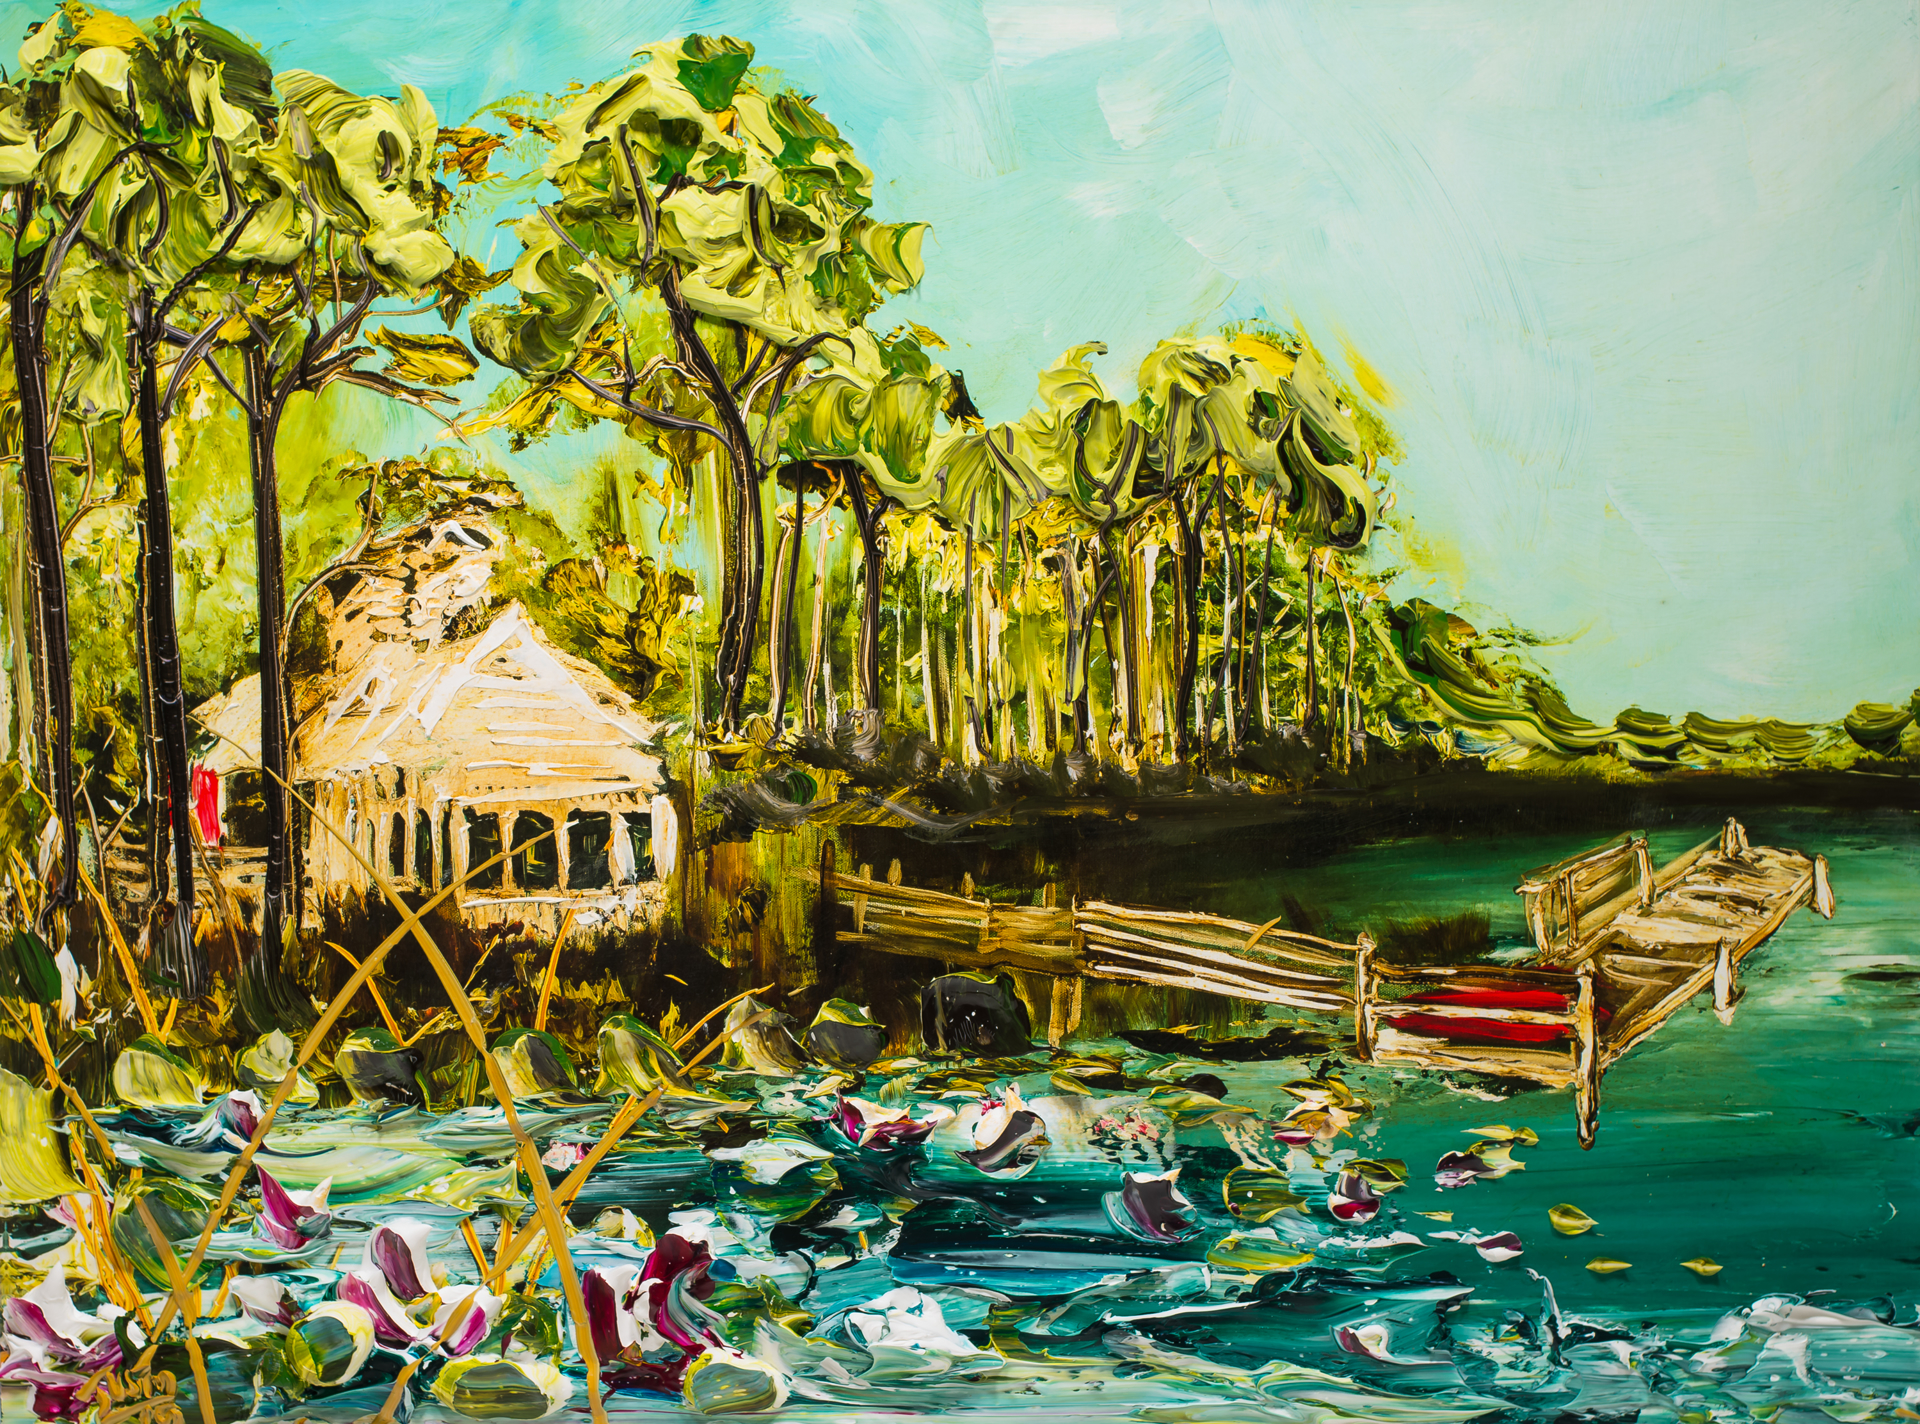 WATERCOLOR BOATHOUSE HPAE5/50 by Justin Gaffrey